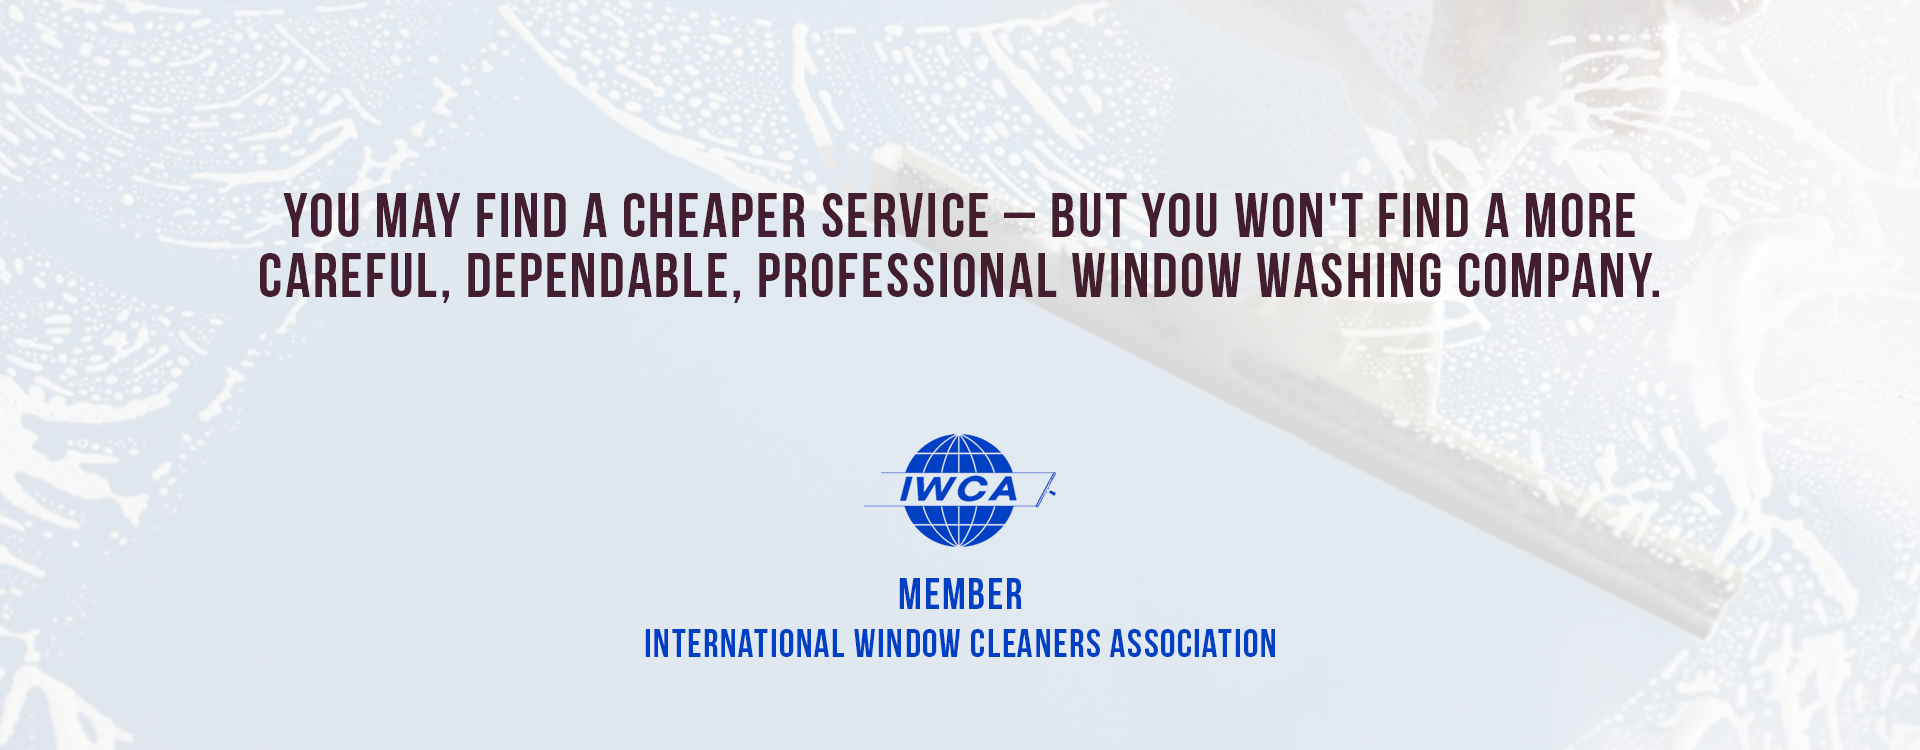 You may find a cheaper service, but you won't find a more careful, dependable, professional, window washing company.